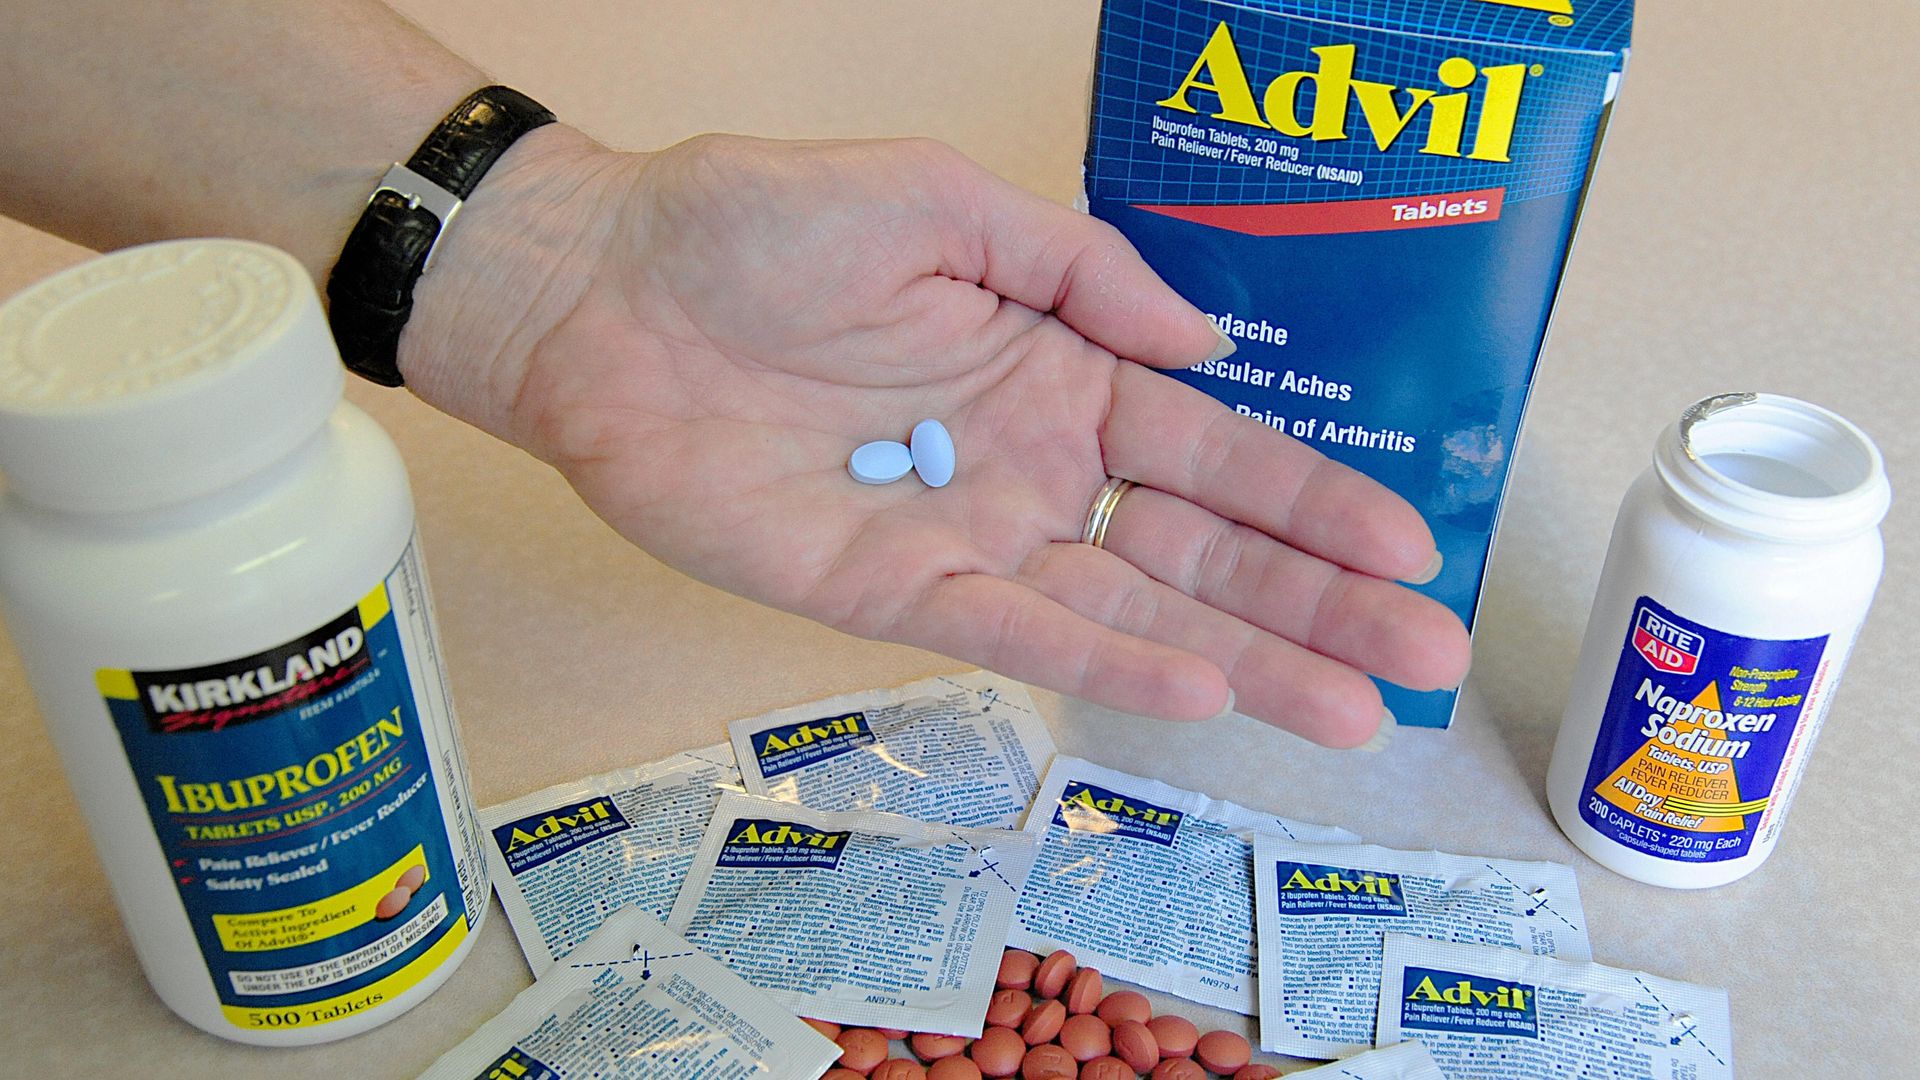 Brand and generic over-the-counter pain medications.